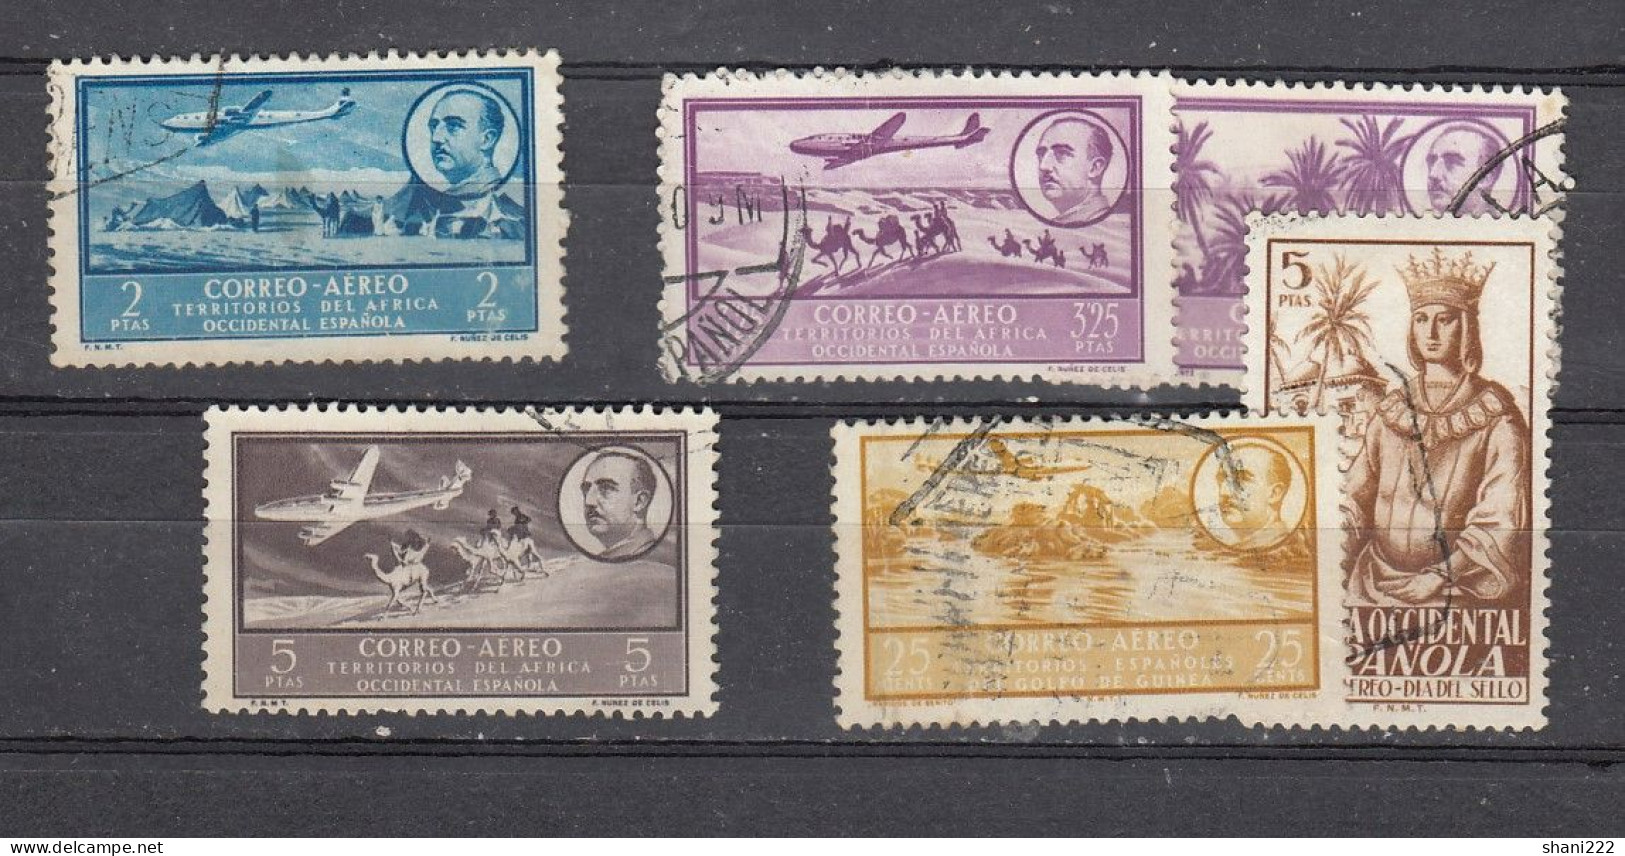 Spanish West Africa - 1951 -Airs - Some Used Items (e-750) - Sahara Spagnolo